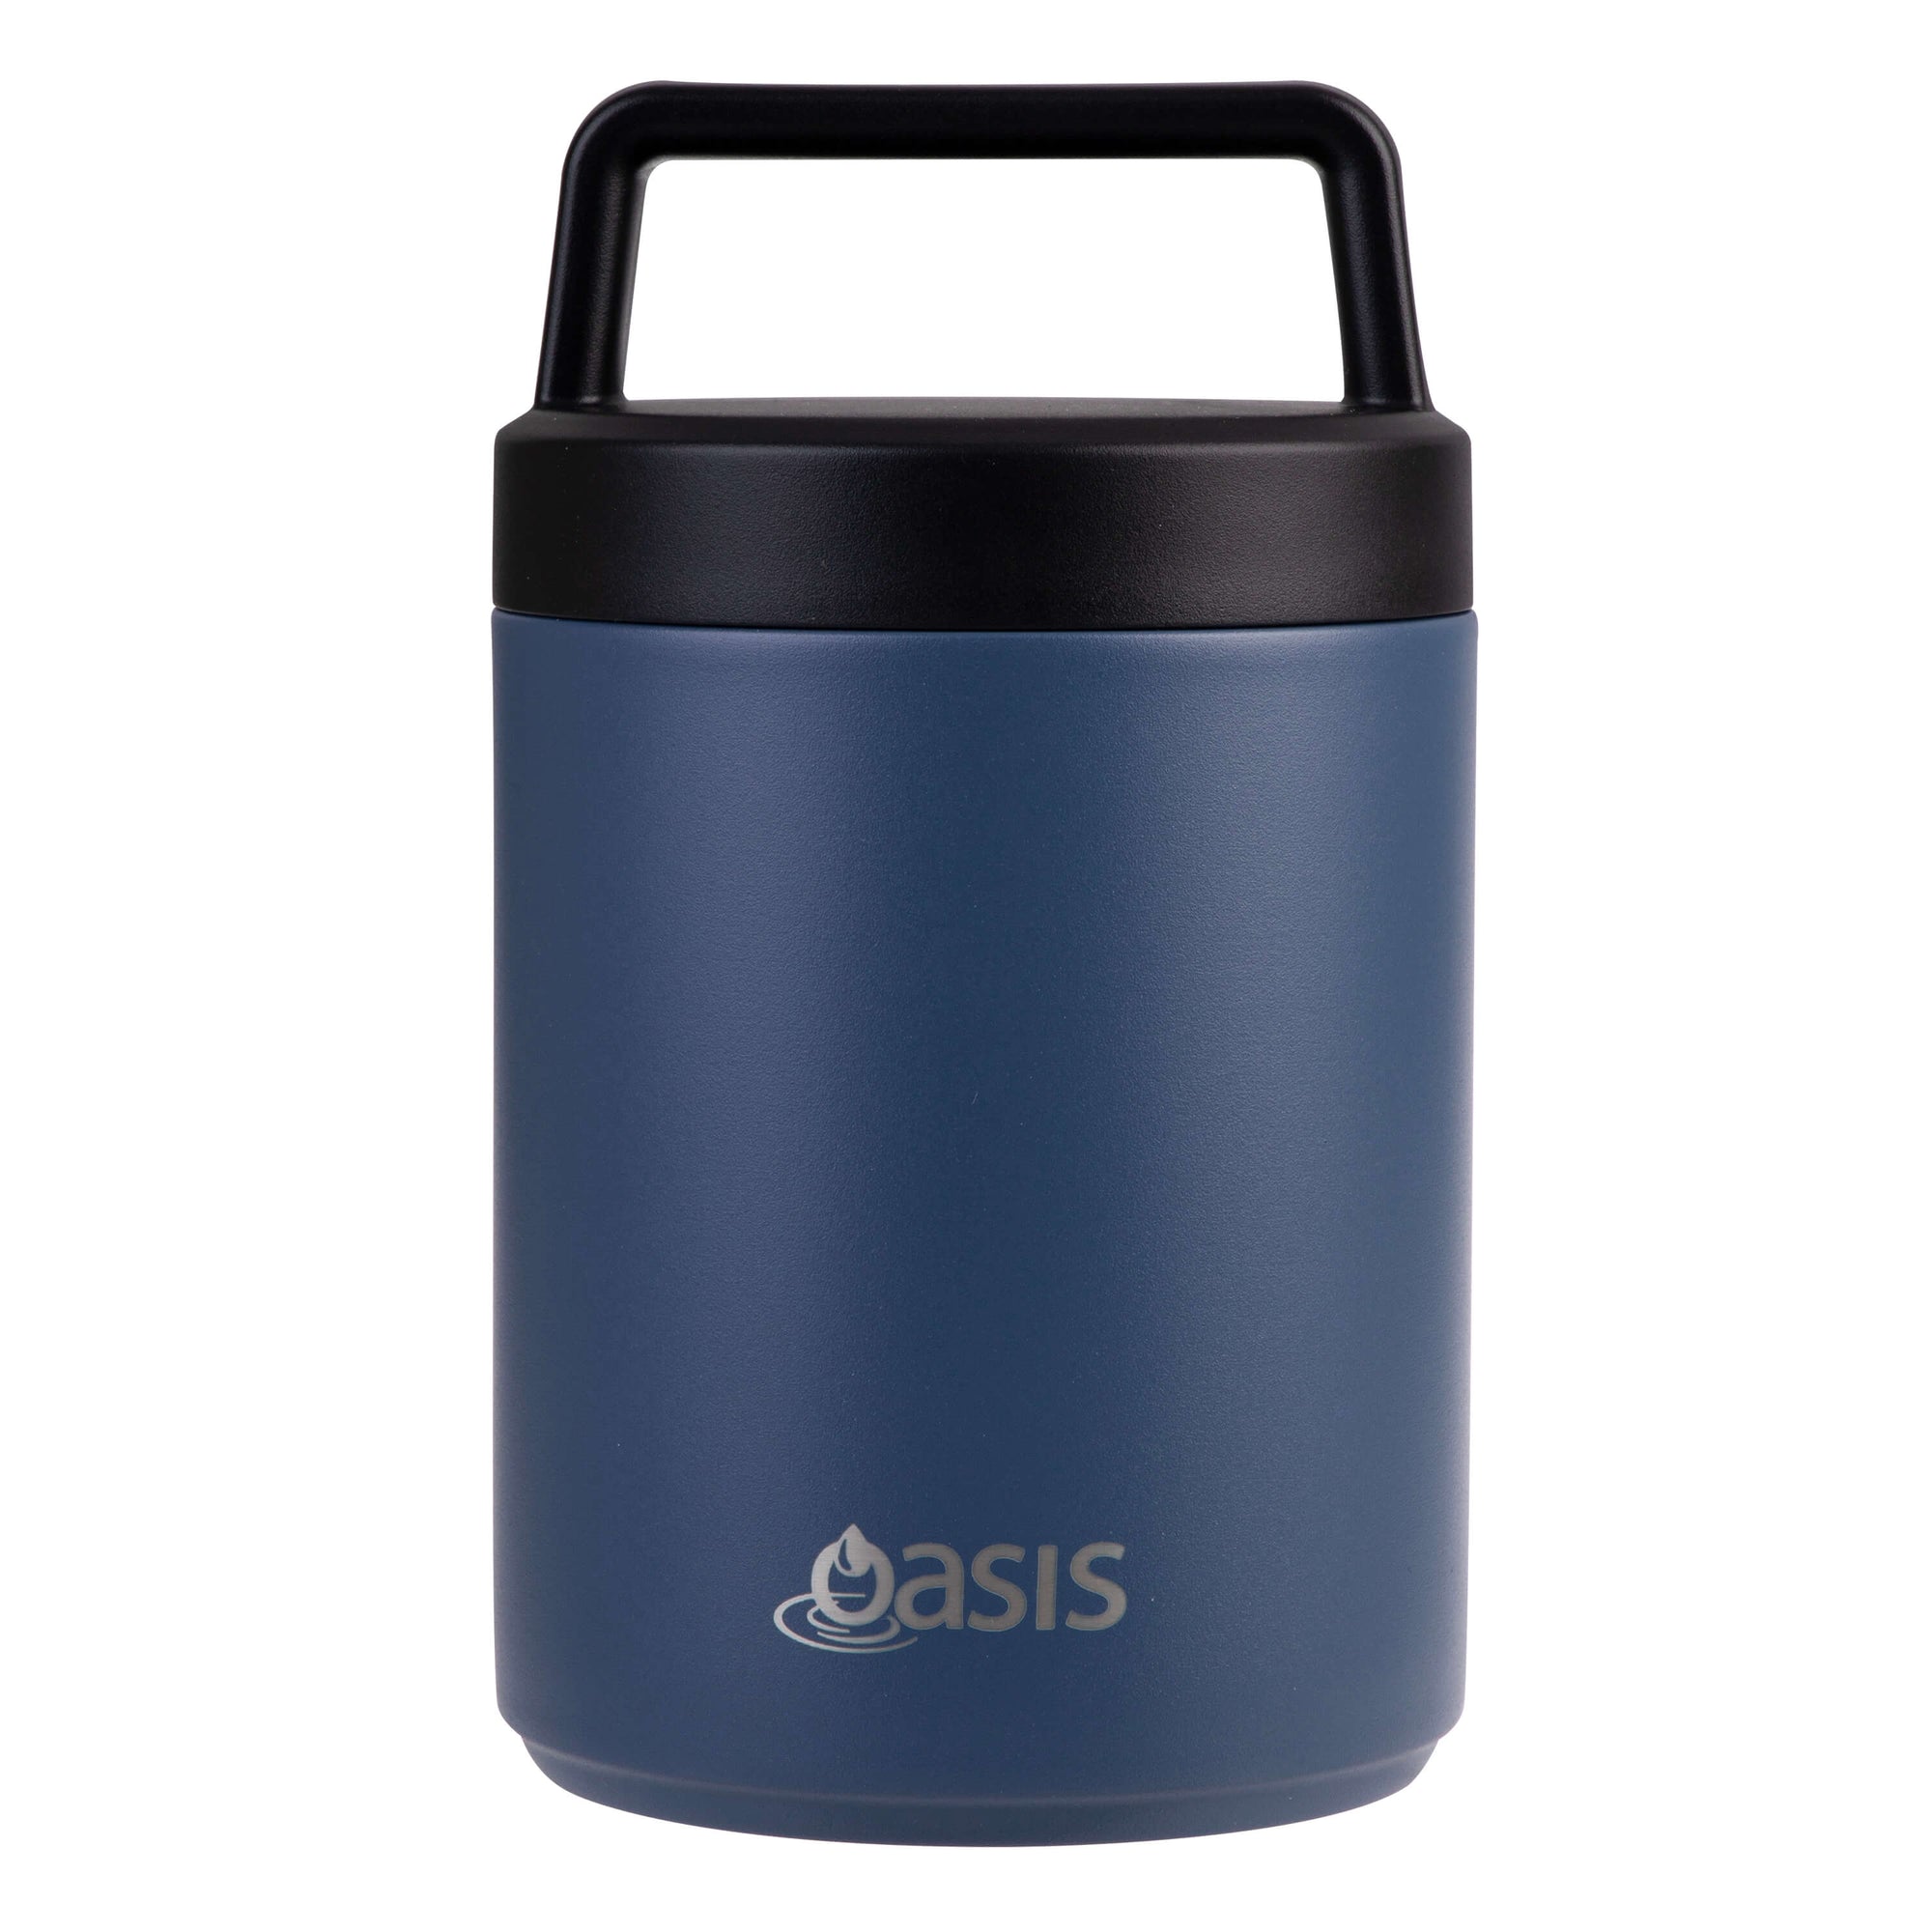 Double Wall Insulated Food Flask Indigo 480mL - LIFESTYLE - Lunch - Soko and Co